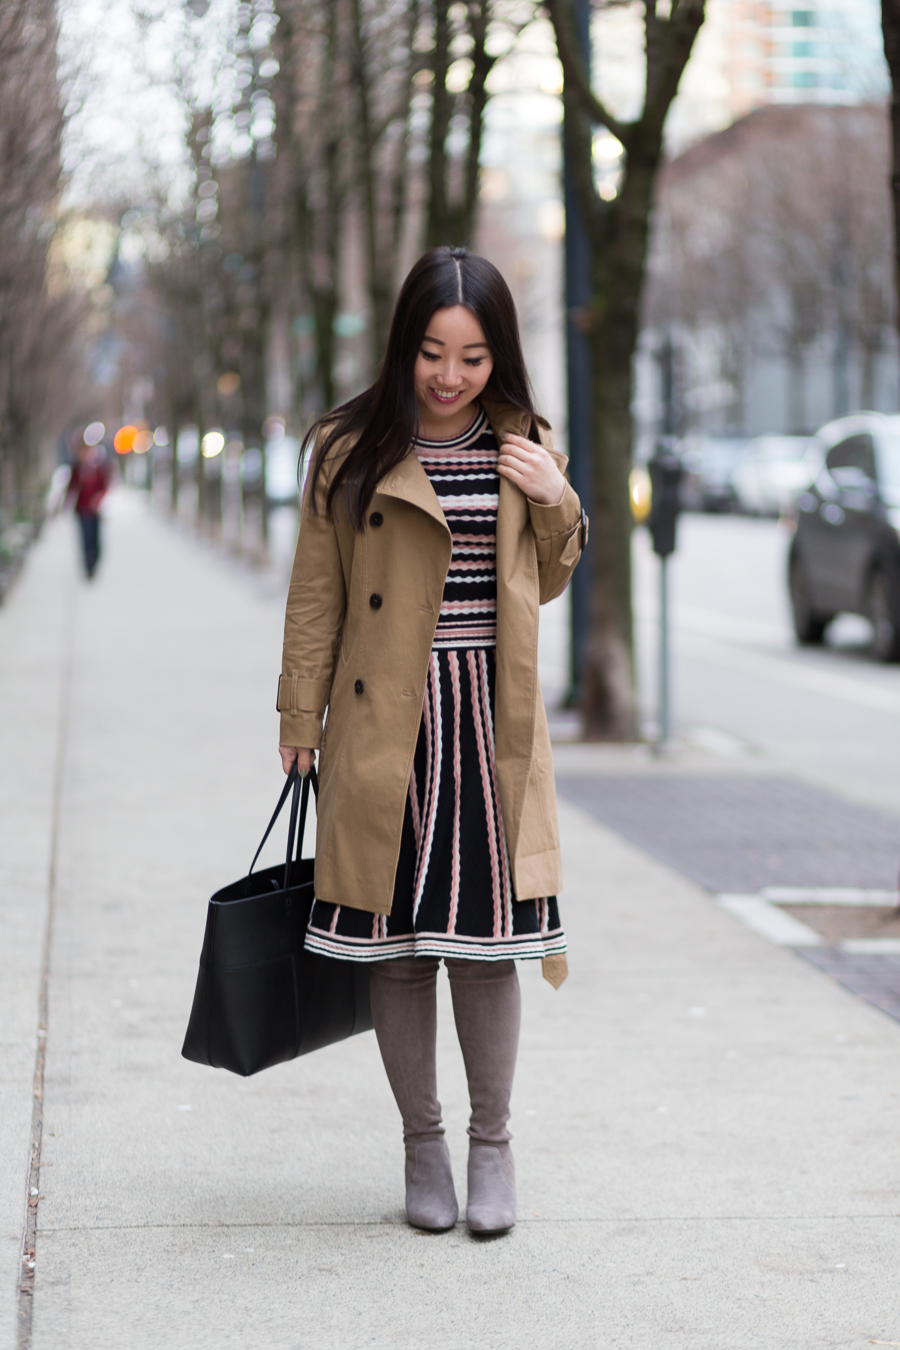 trench coat kate spade sweater dress OTK suede boots